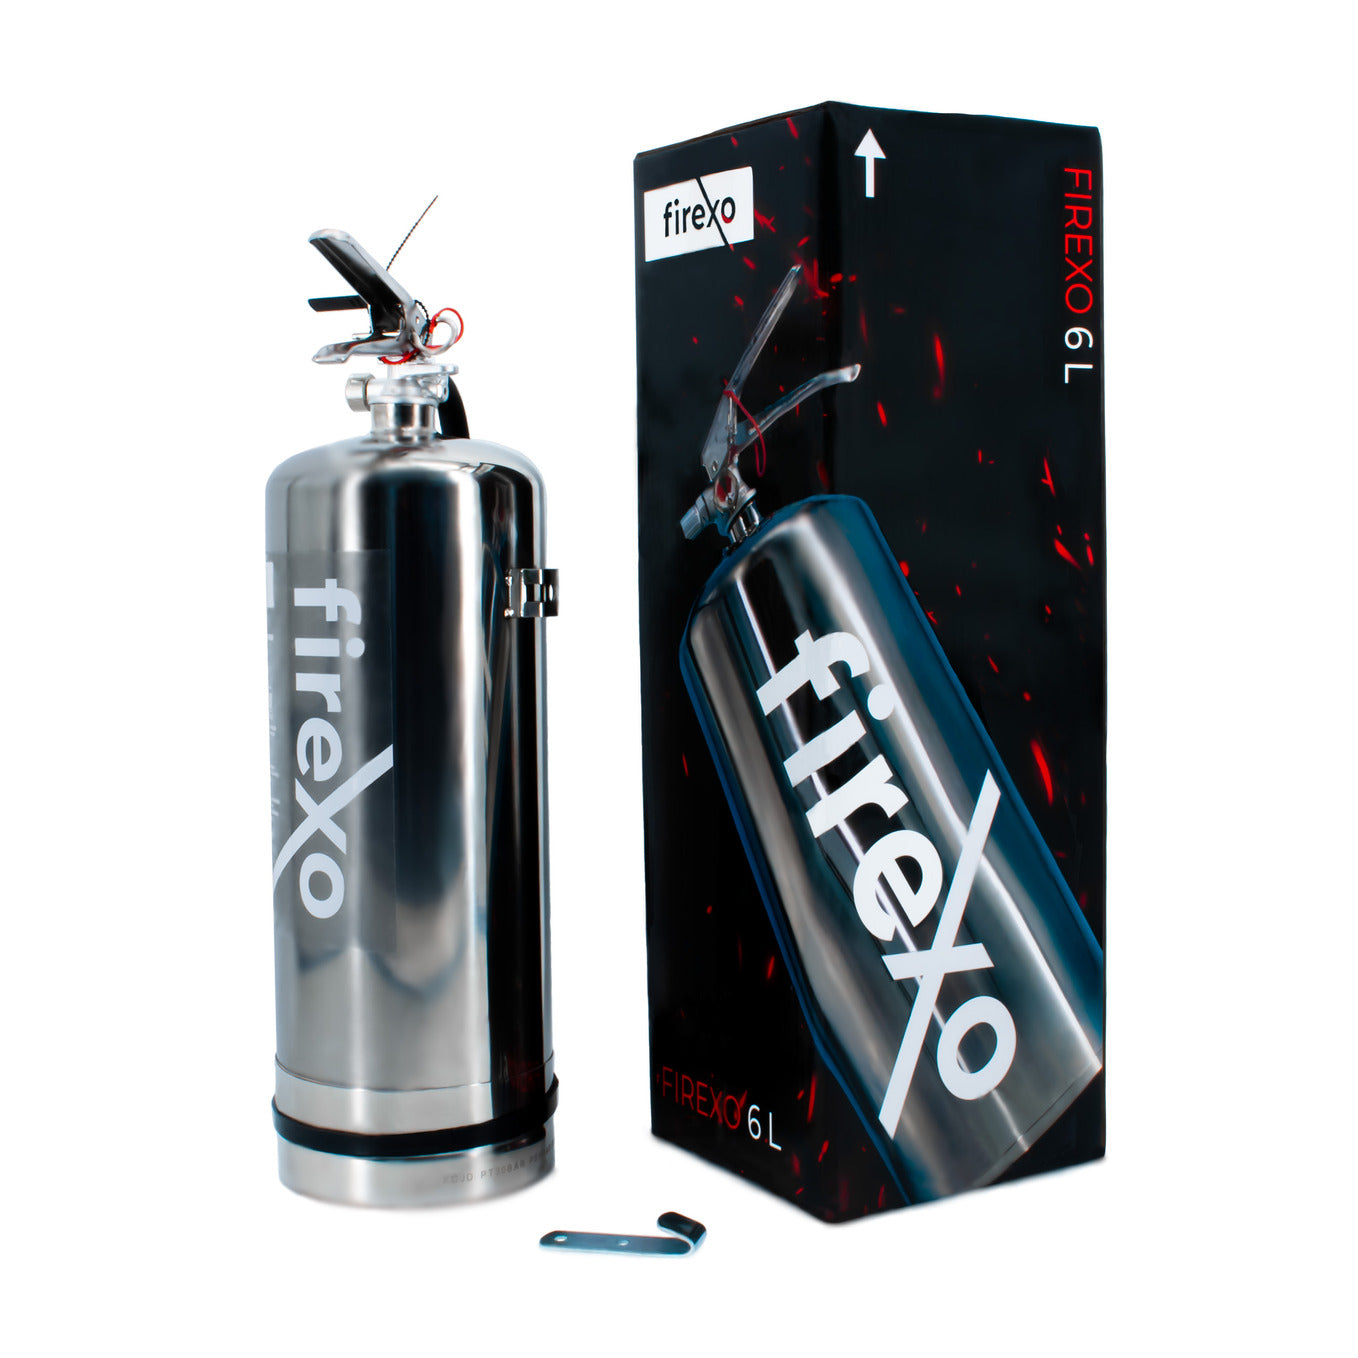 Firexo Stainless Steel 6 Litre Fire Extinguisher